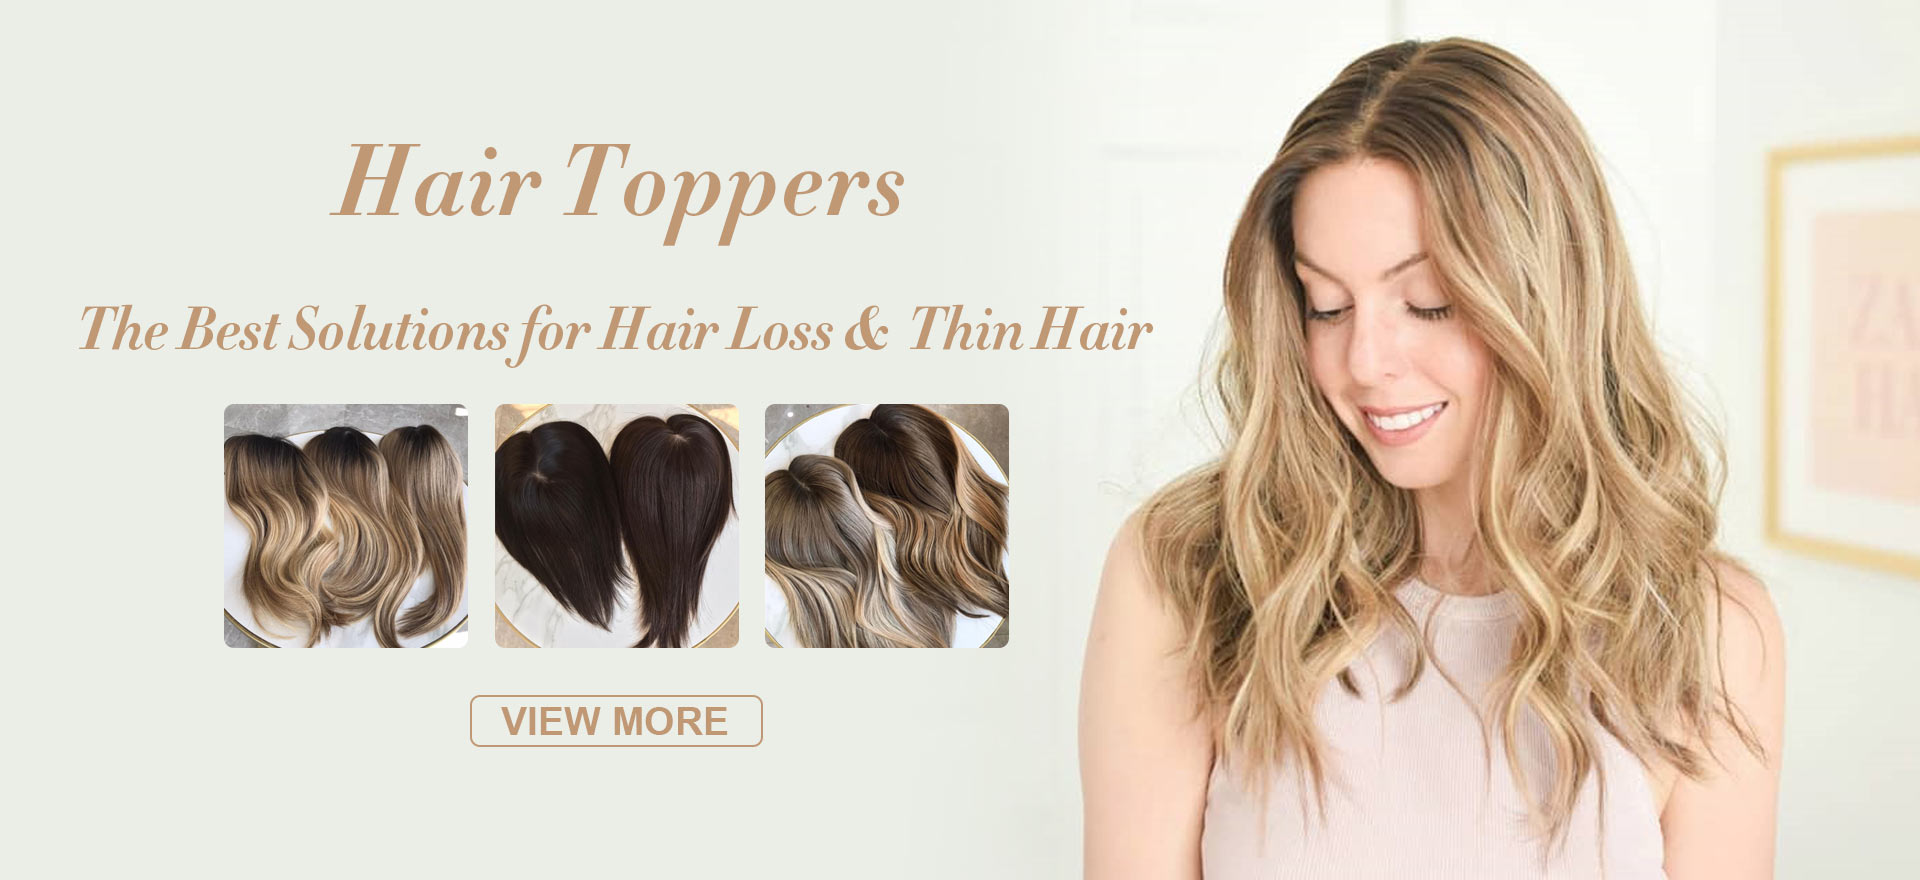 Human hair topper, wigs, and extensions manufacturer